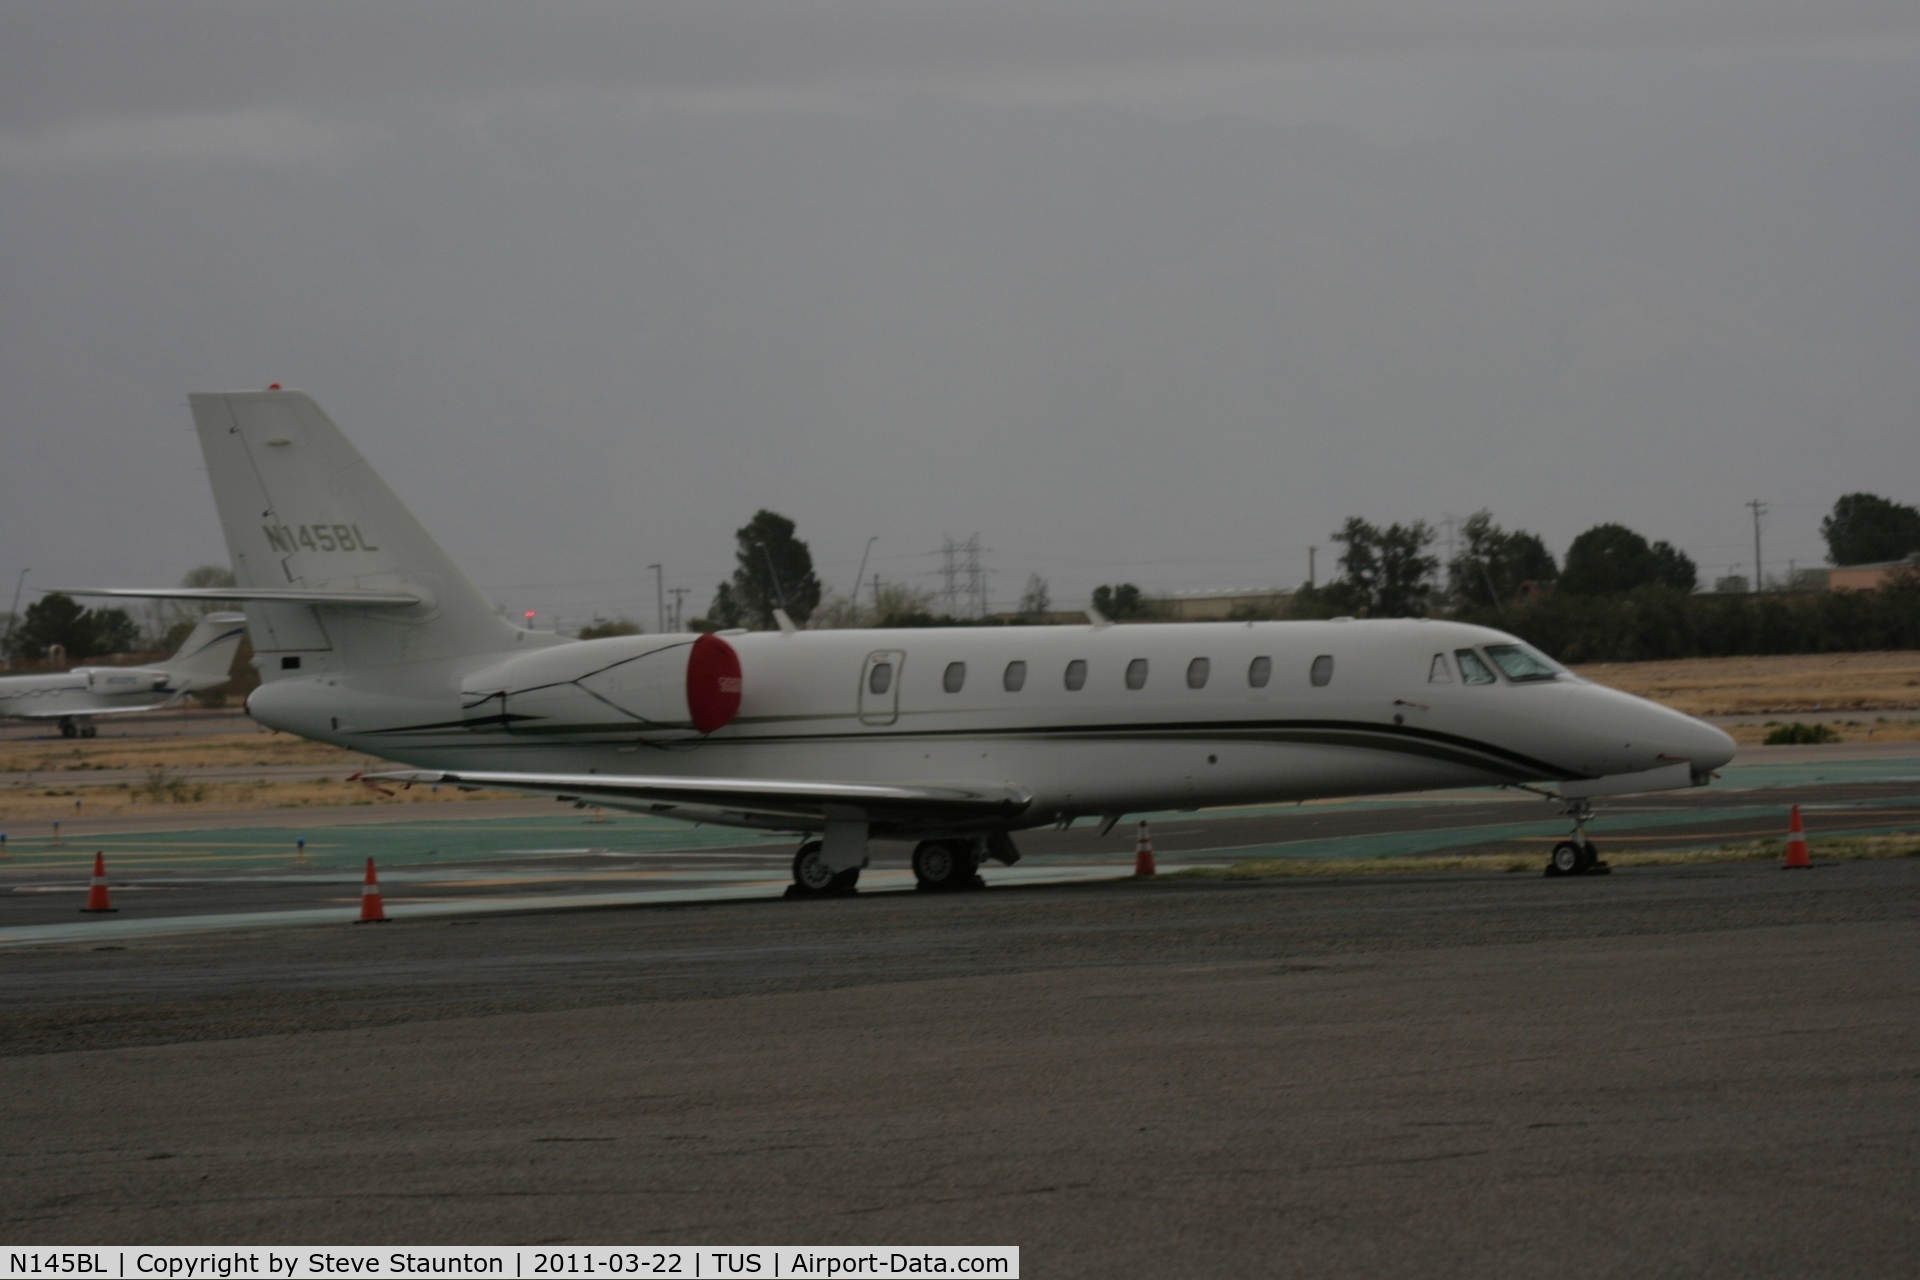 N145BL, 2005 Cessna 680 Citation Sovereign C/N 680-0045, Taken at Tucson International Airport, in March 2011 whilst on an Aeroprint Aviation tour